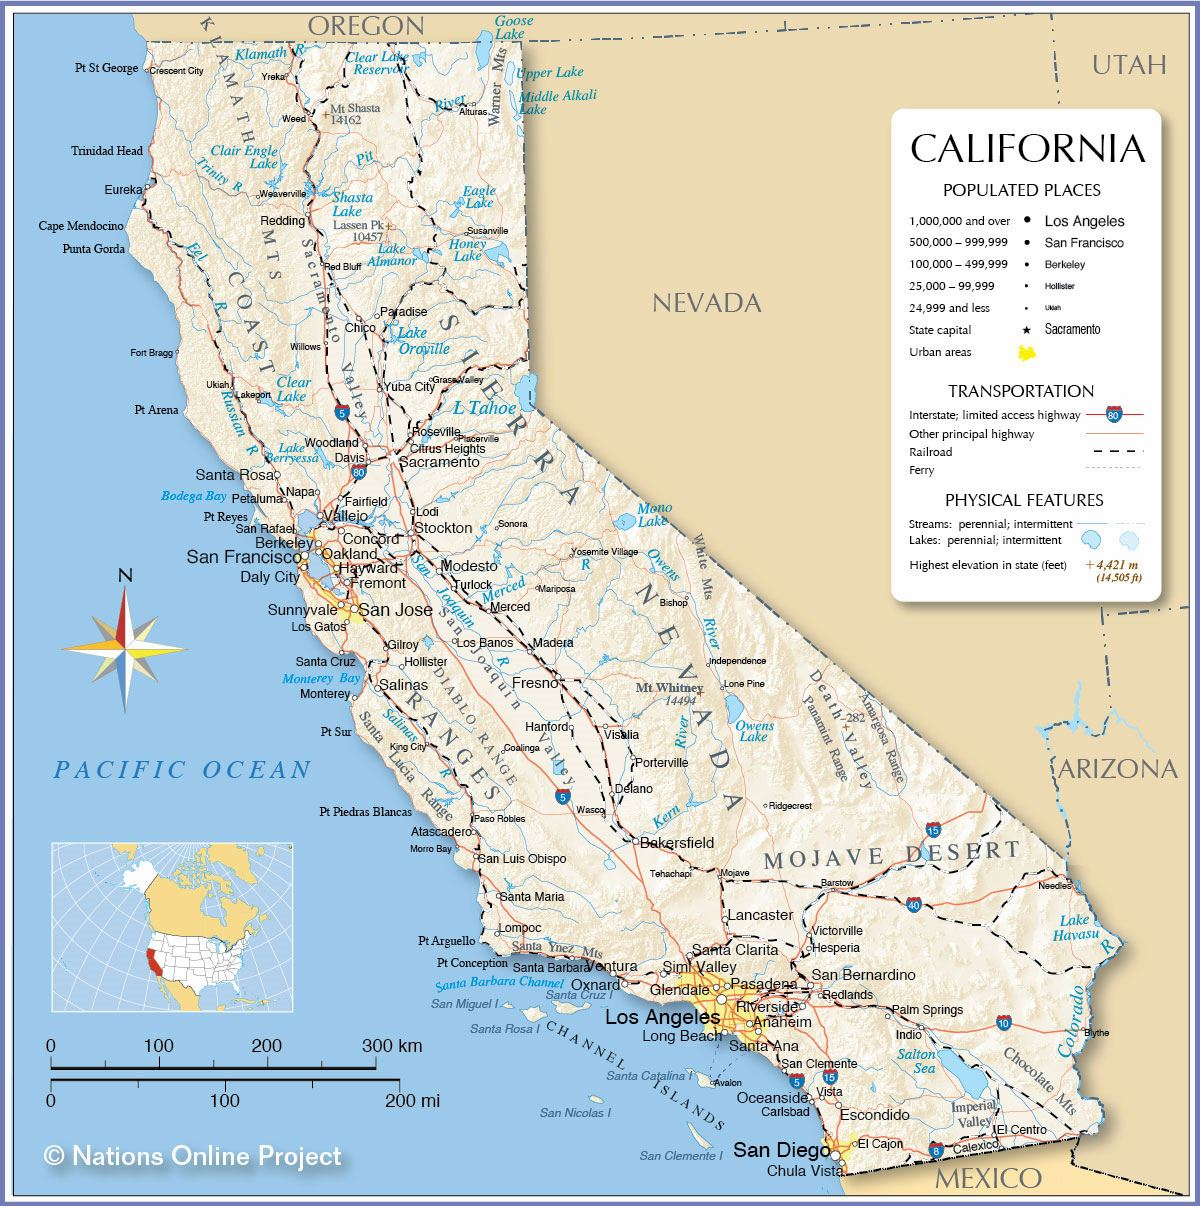 Large California Maps For Free Download And Print | High-Resolution - Detailed Map California